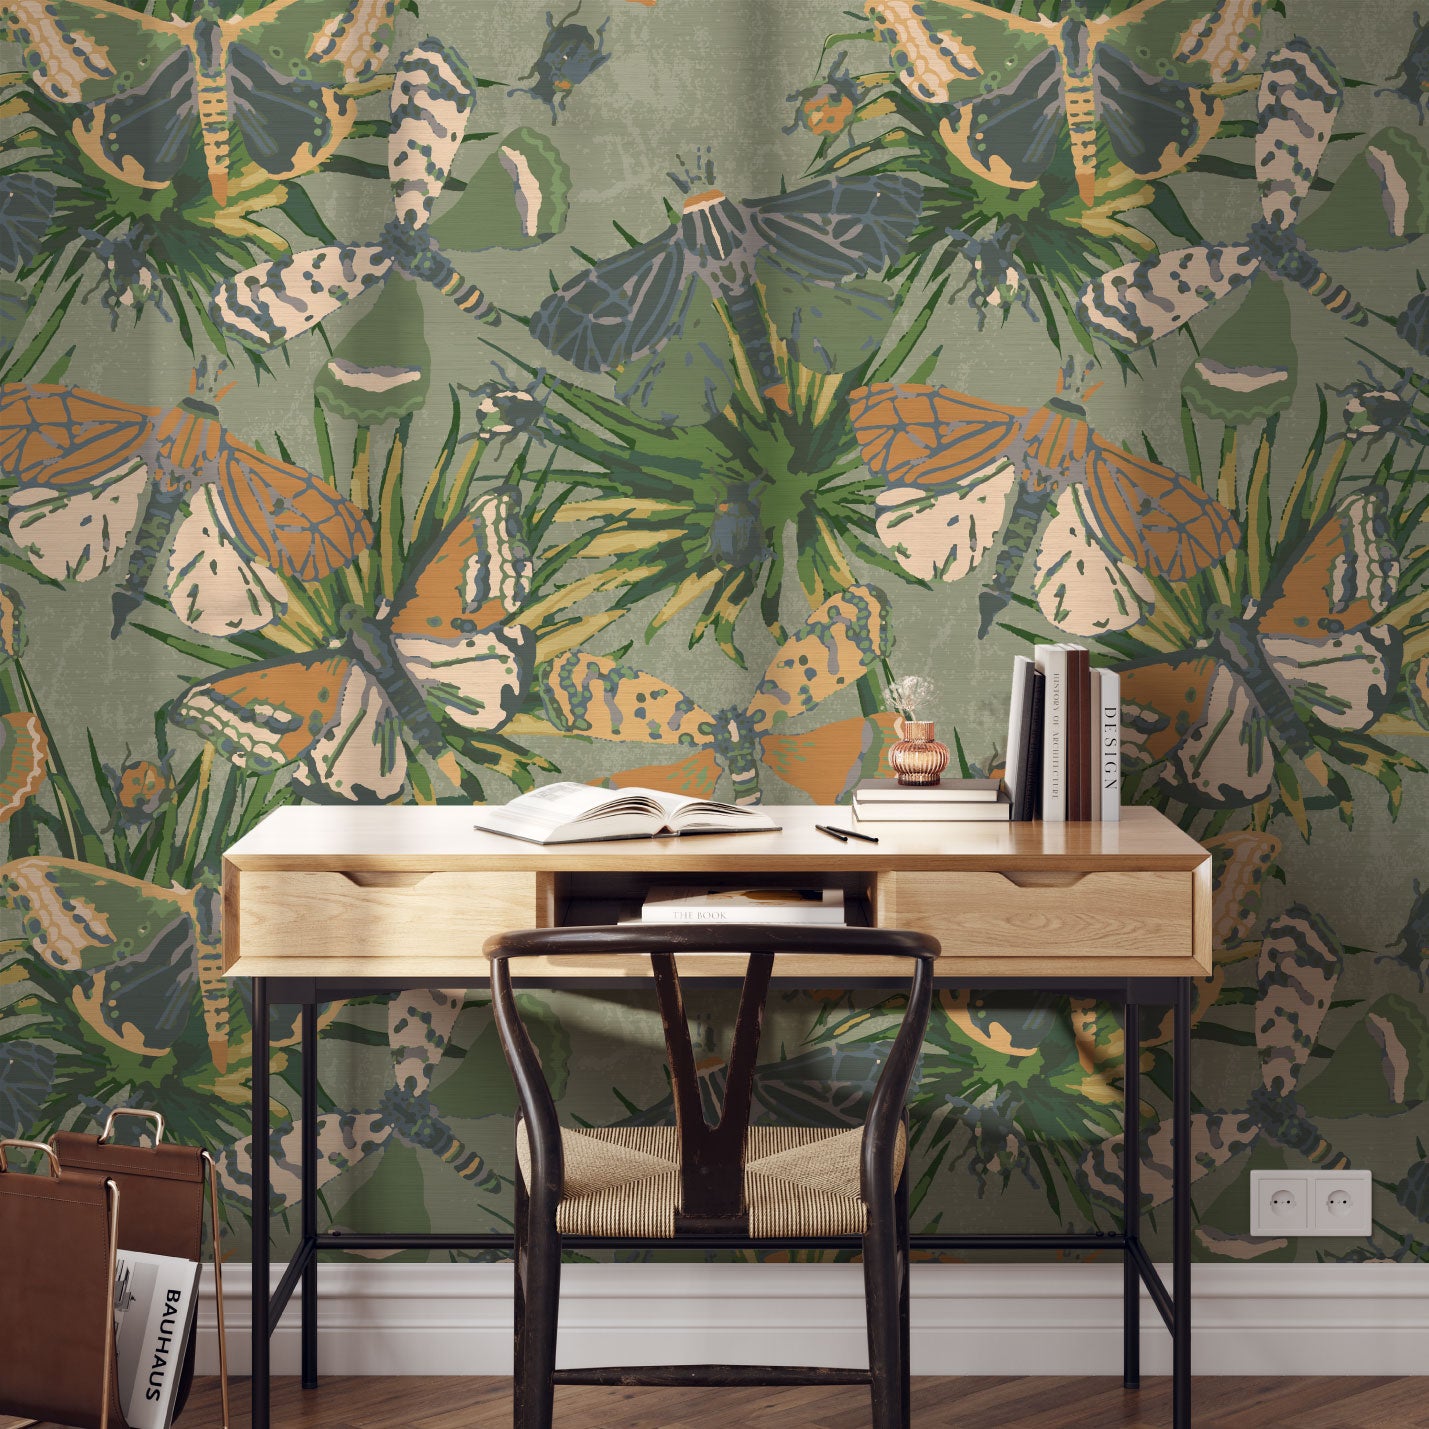 Load image into Gallery viewer, Grasscloth printed wallpaper with allover butterflies, palm leaves and mini insects overlapped in an oversized print.Grasscloth wallpaper Natural Textured Eco-Friendly Non-toxic High-quality Sustainable Interior Design Bold Custom Tailor-made Retro chic Bold tropical butterfly bug palm leaves animals botanical garden nature kids playroom bedroom nursery green moss jungle olive study office
